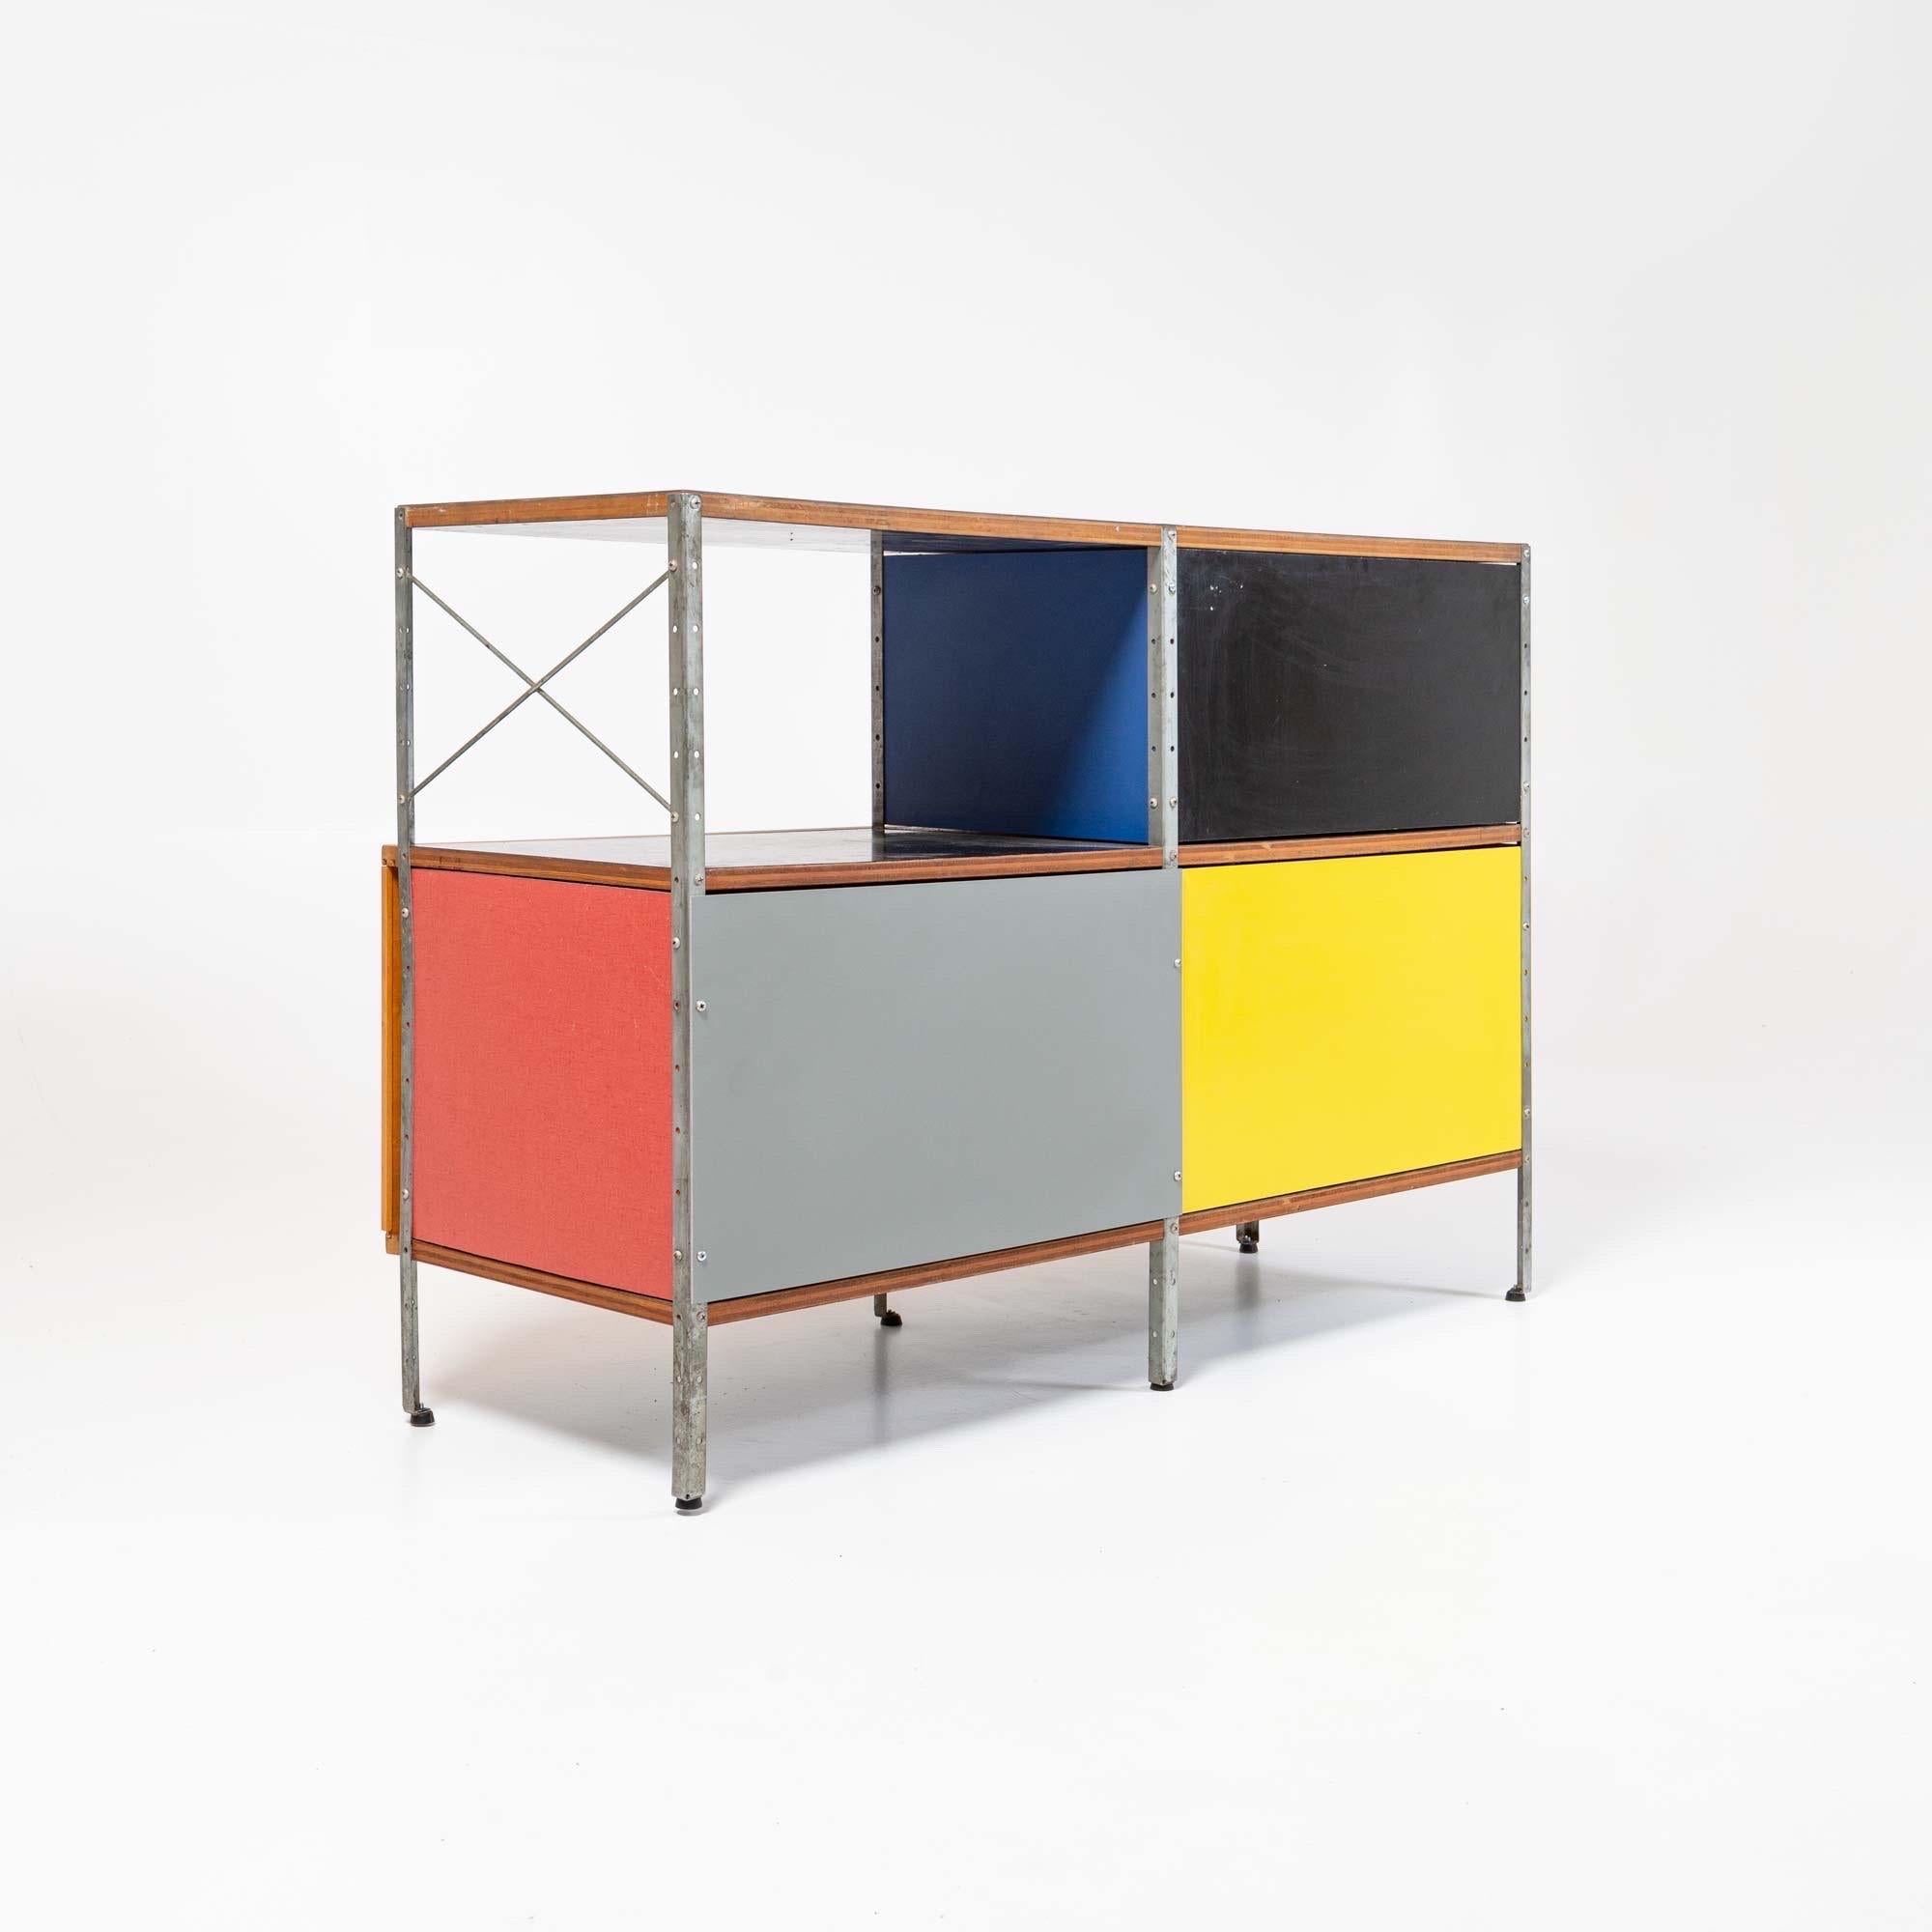 A rather iconic design from Charles and Ray Eames for Herman Miller, Eames Shelving Units or ESU for short have recently reached a new level of collectability due to the rarity especially of the First Generation, produced in 1950.

Lots of modern